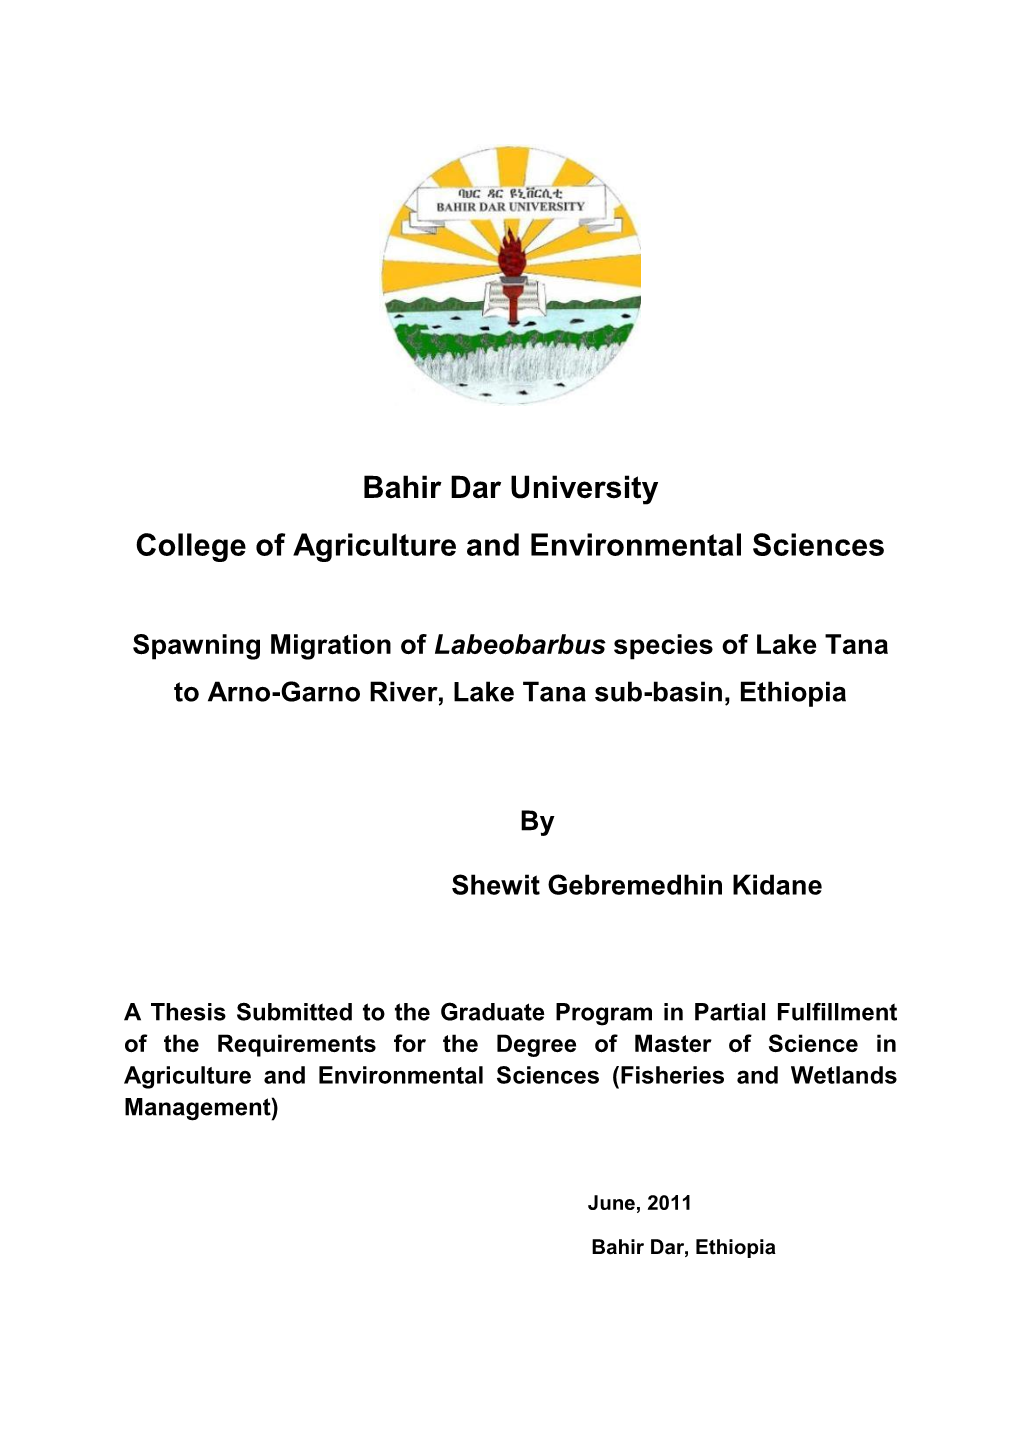 Bahir Dar University College of Agriculture and Environmental Sciences